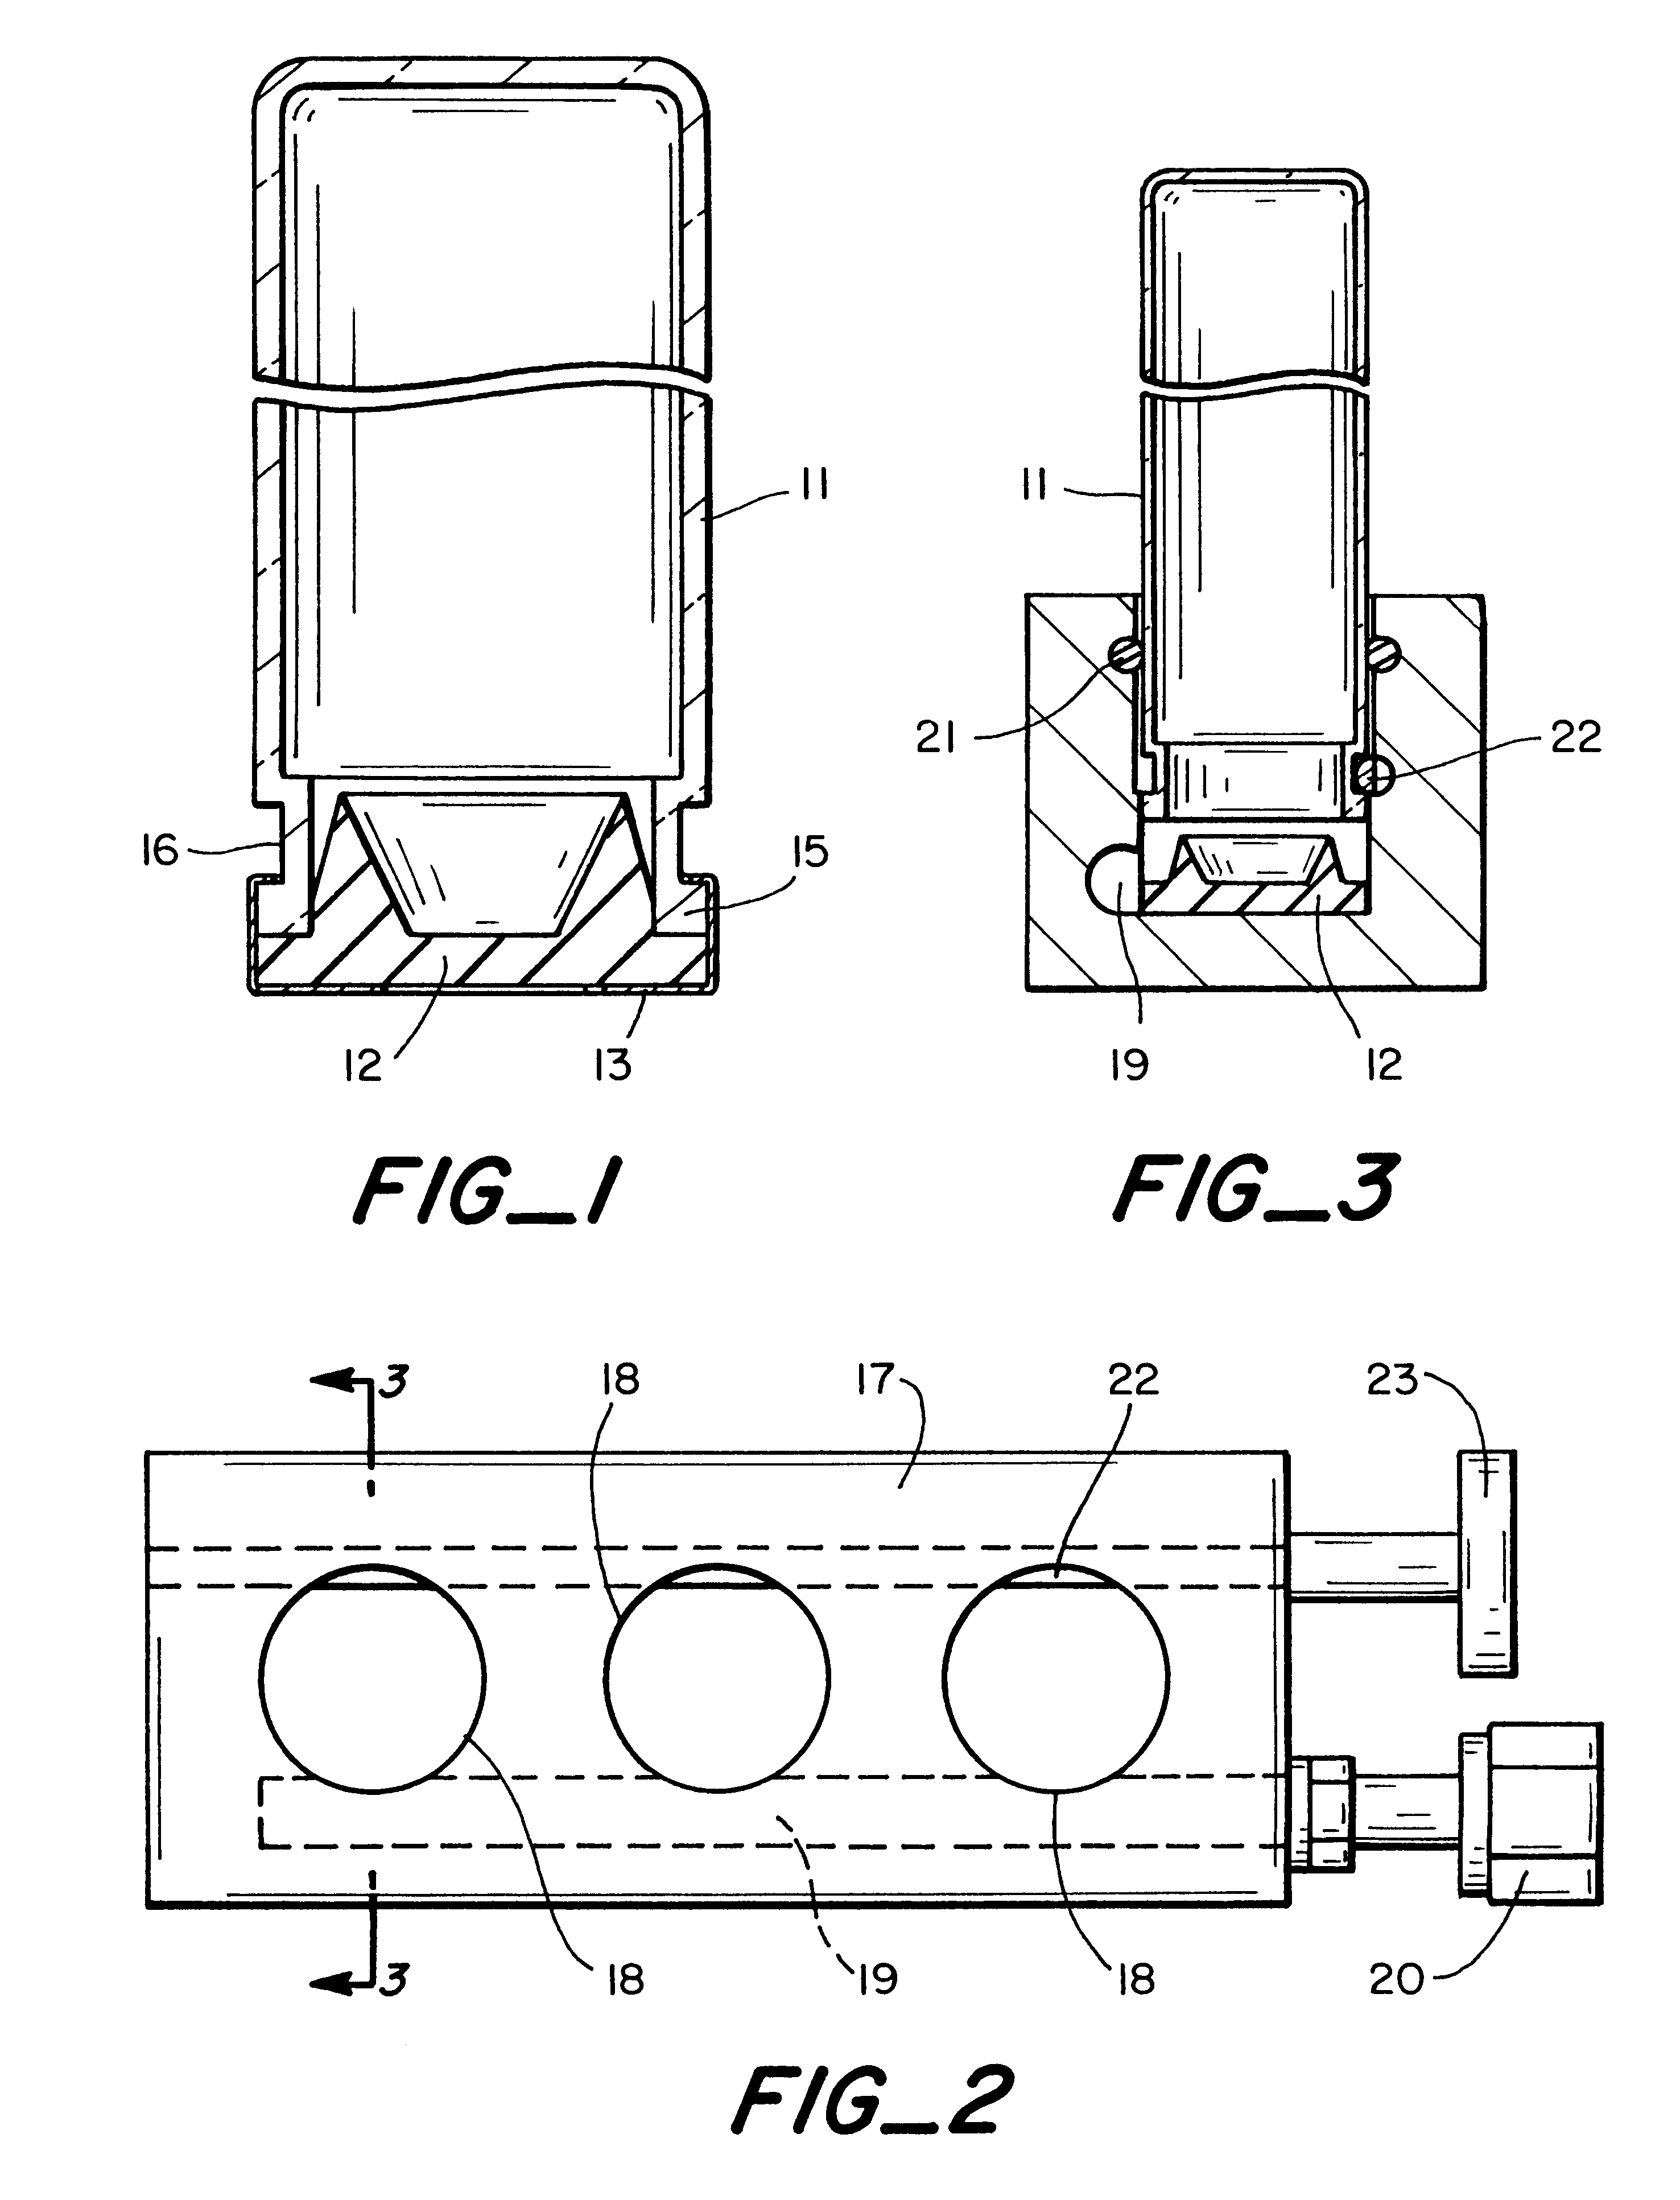 Method and apparatus for field fluid sampling and dissolved gas analysis